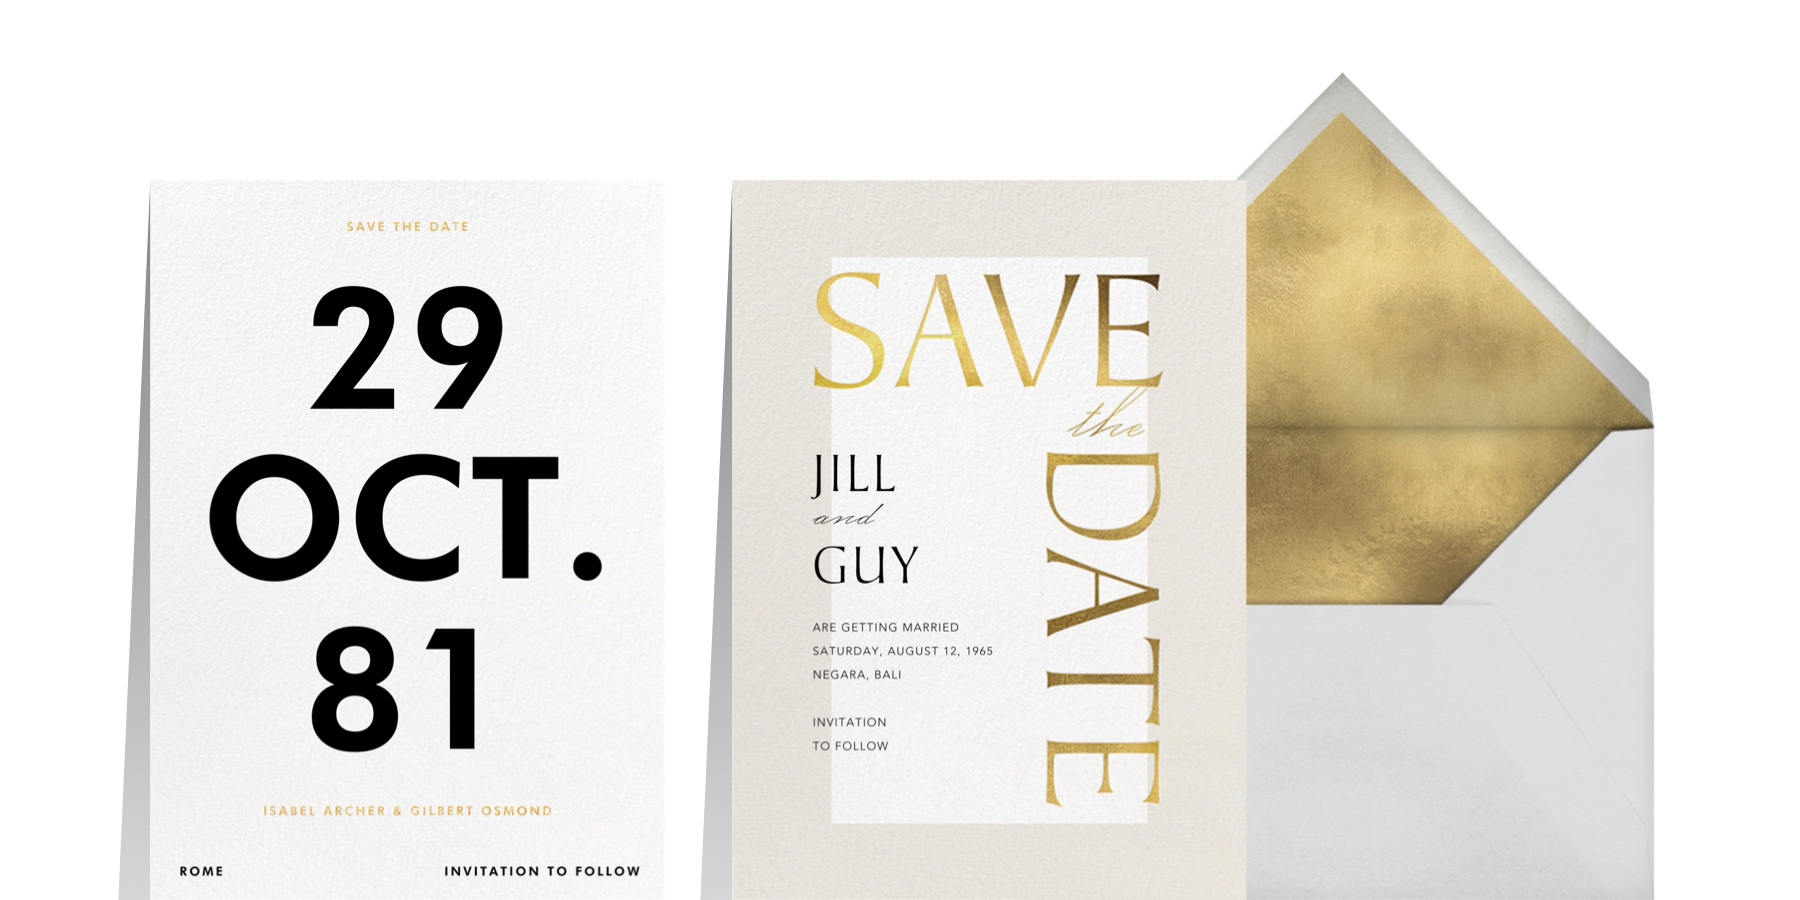 6 Things to Know Before You Send Your Save-the-Dates